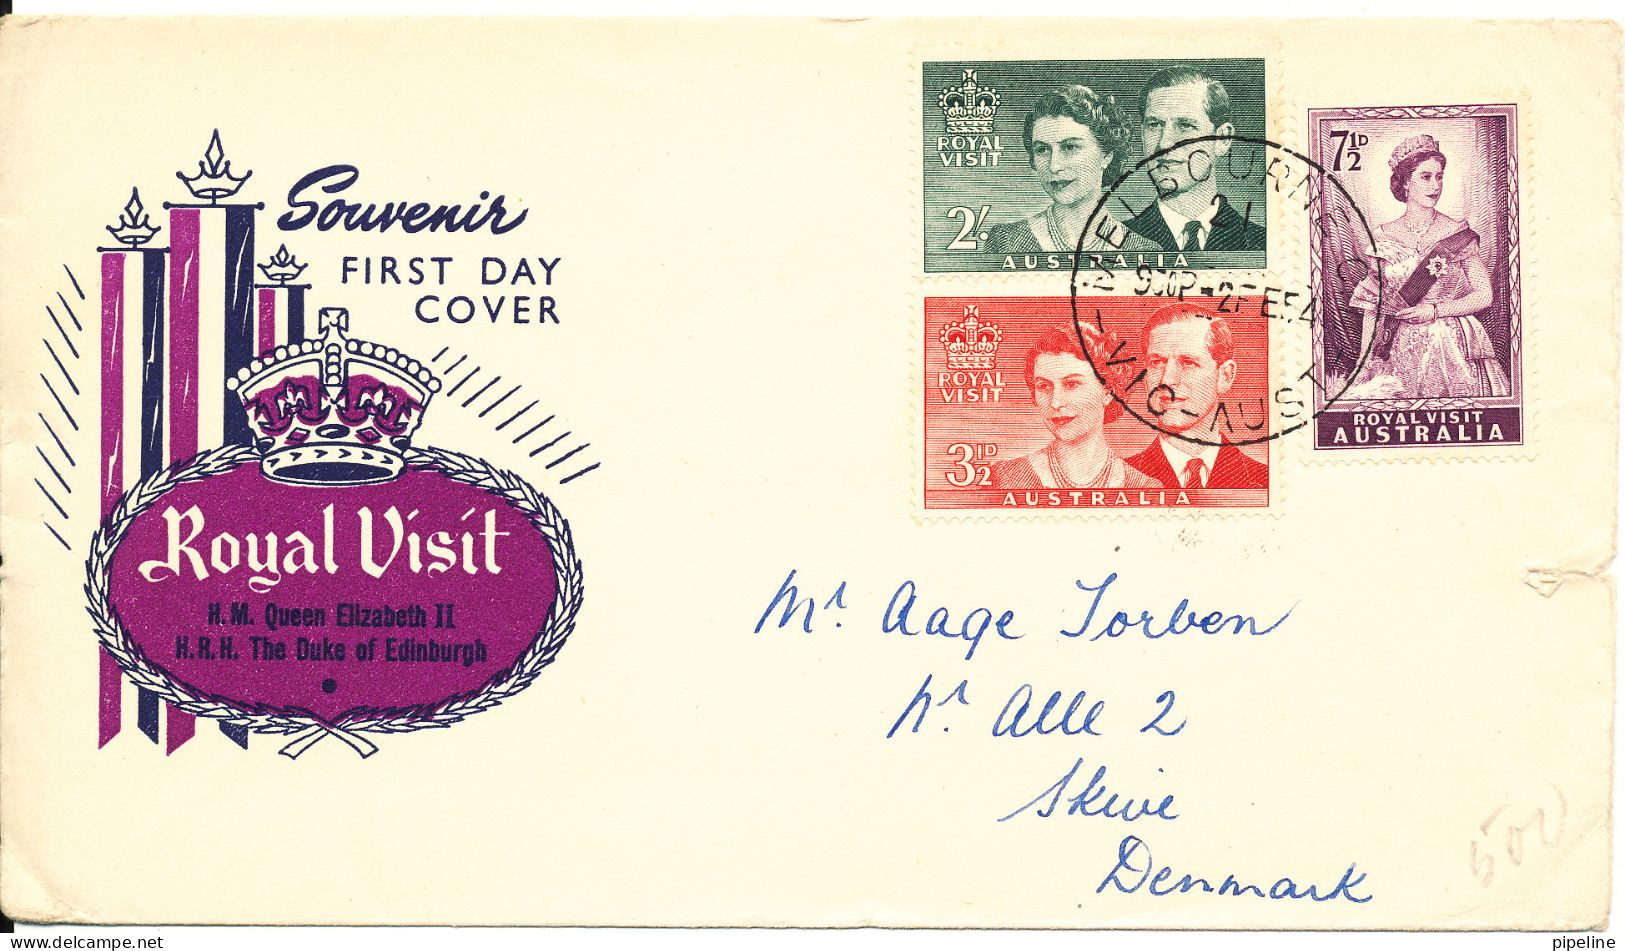 Australia FDC 2-2-1954 Royal Visit Complete Set Of 3 With Cachet Sent To Denmark Tear In The Right Side Of The Cover - Primo Giorno D'emissione (FDC)